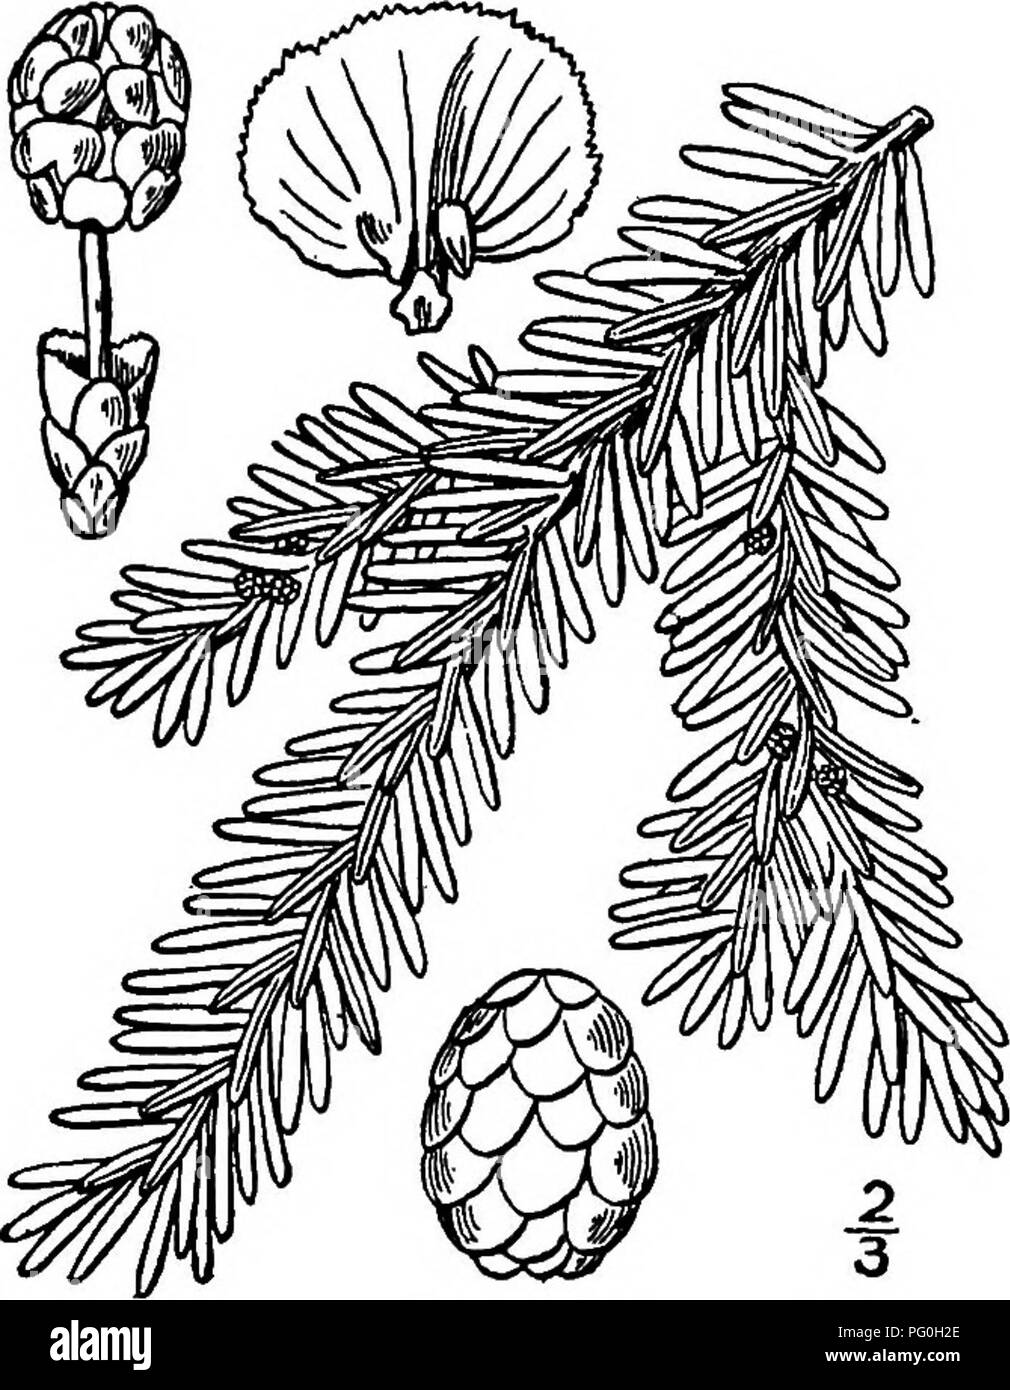 . North American trees : being descriptions and illustrations of the trees growing independently of cultivation in North America, north of Mexico and the West Indies . Trees. Canadian Hemlock 65 The name is Japanese, Tsuga being the name for two of their most impor- tant timber trees. The astringent bark of all the species is extensively used in tanning. Cones ovoid to oval; leaves blunt or notched, flat. Eastern trees; cones stalked. Northern tree; cone-scales nearly round, appressed. i. T. canadensis. Southern tree; cone-scales oblong, longer than wide, spreading. 2. T. caroUniana. Western t Stock Photo